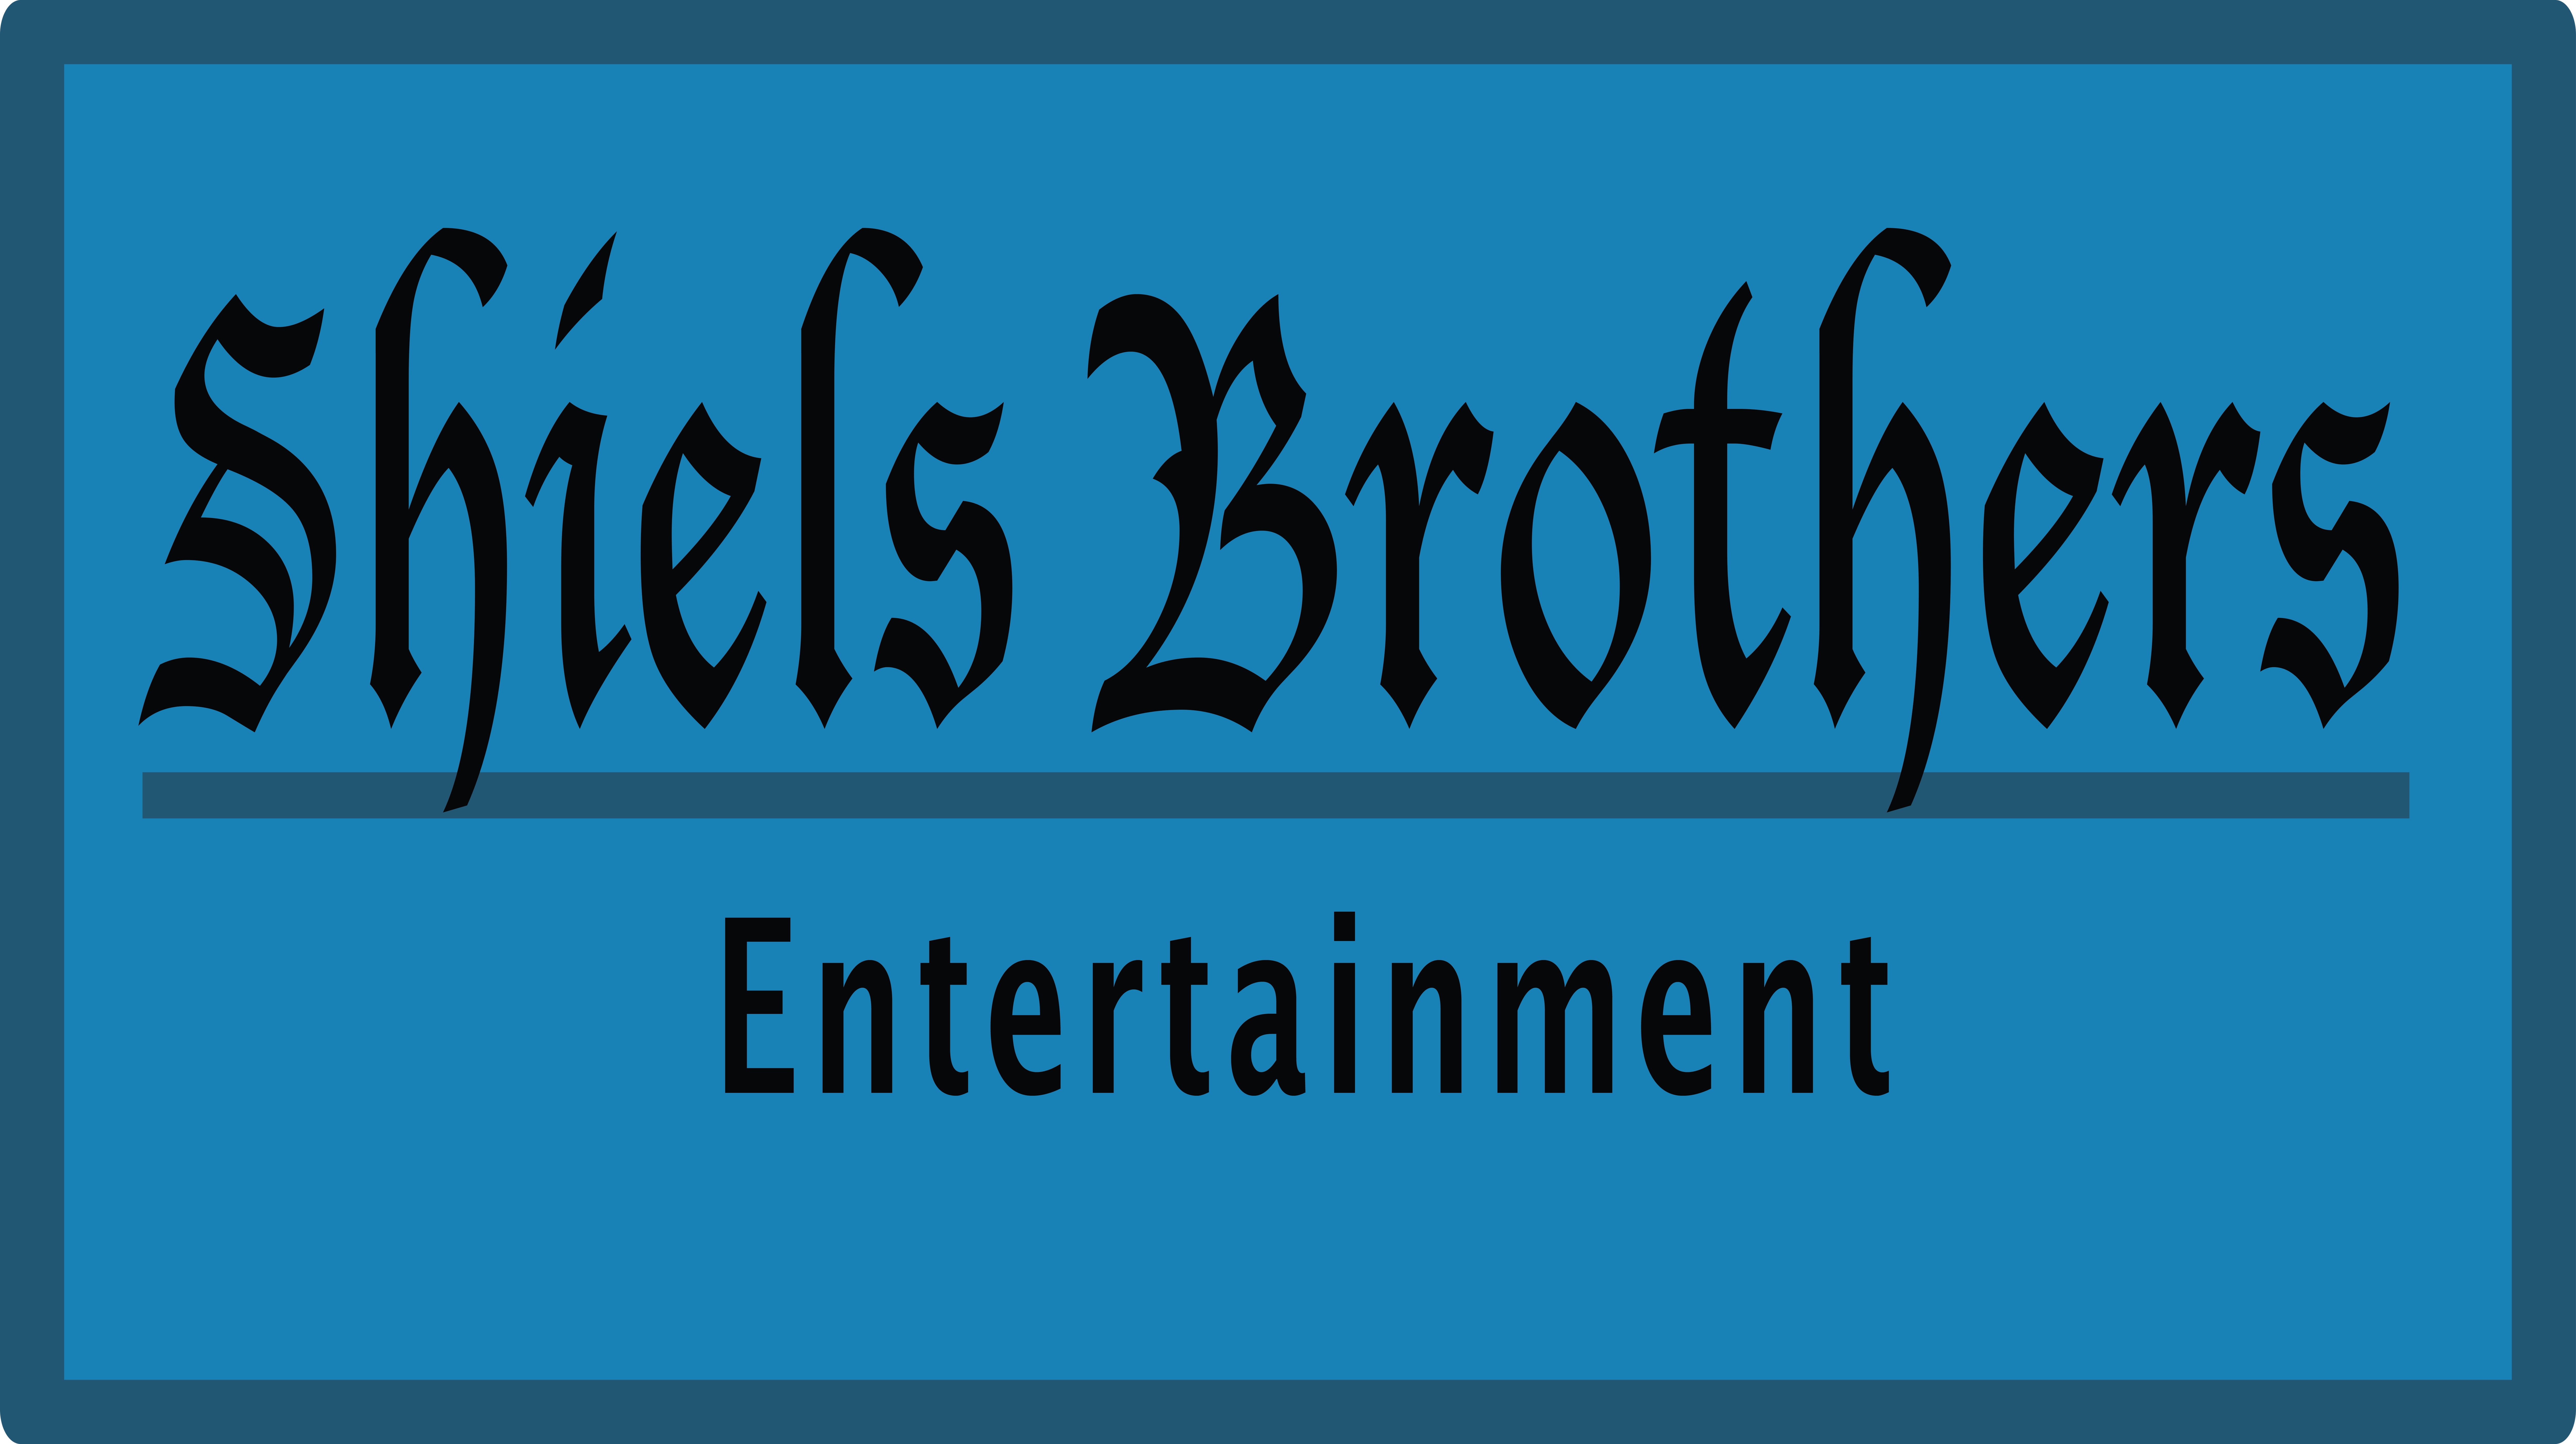 Shiels Brothers Entertainment